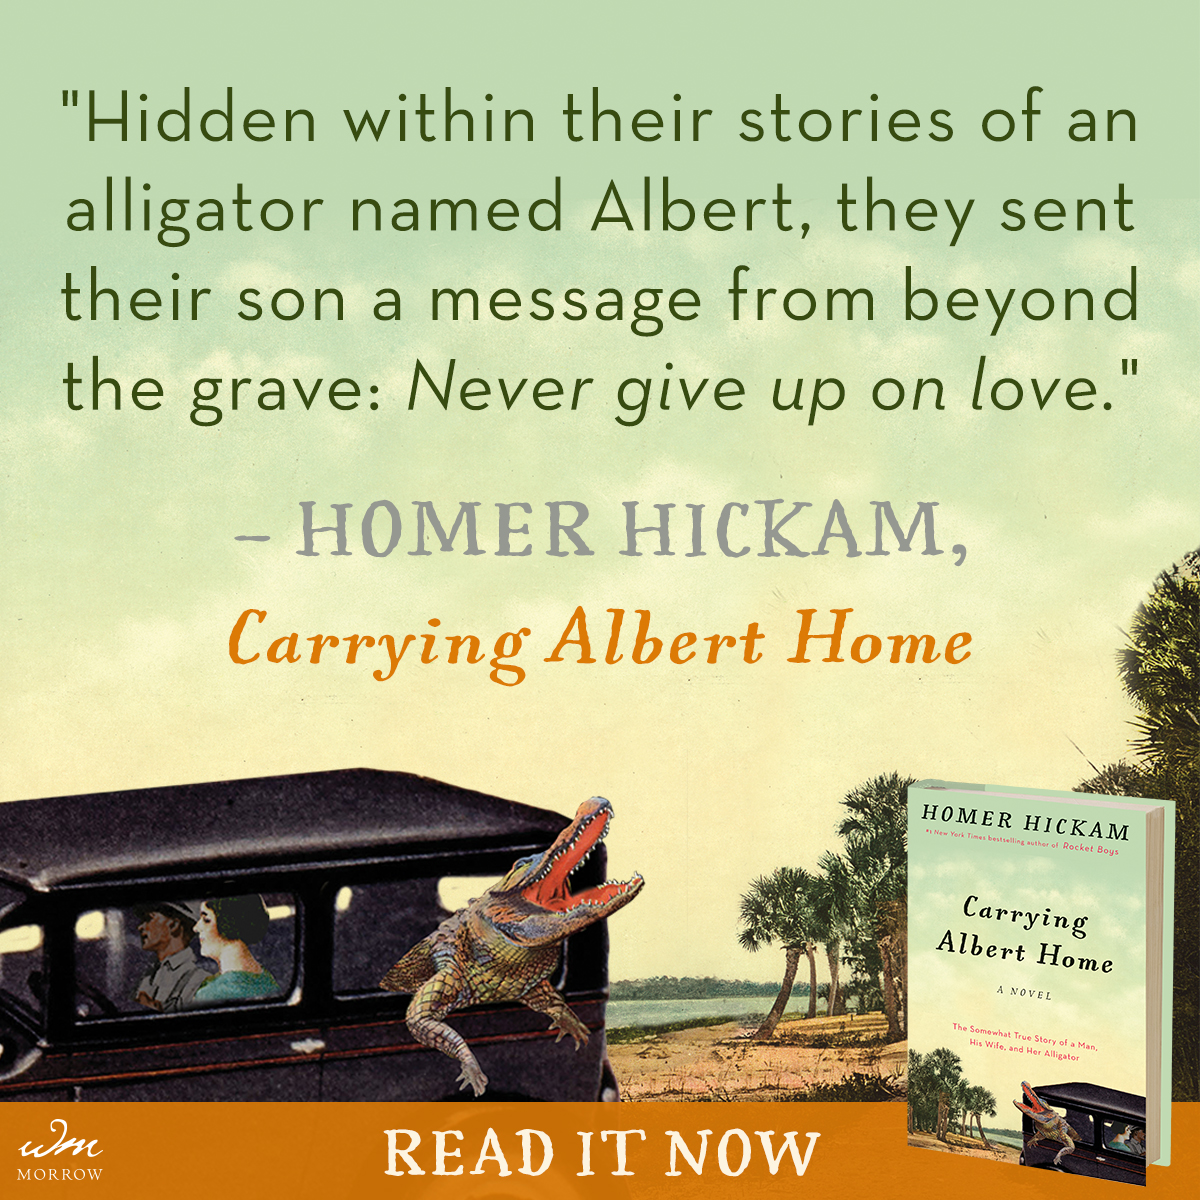 Special offer for Carrying Albert Home and all Homer Hickam books for the Holiday season